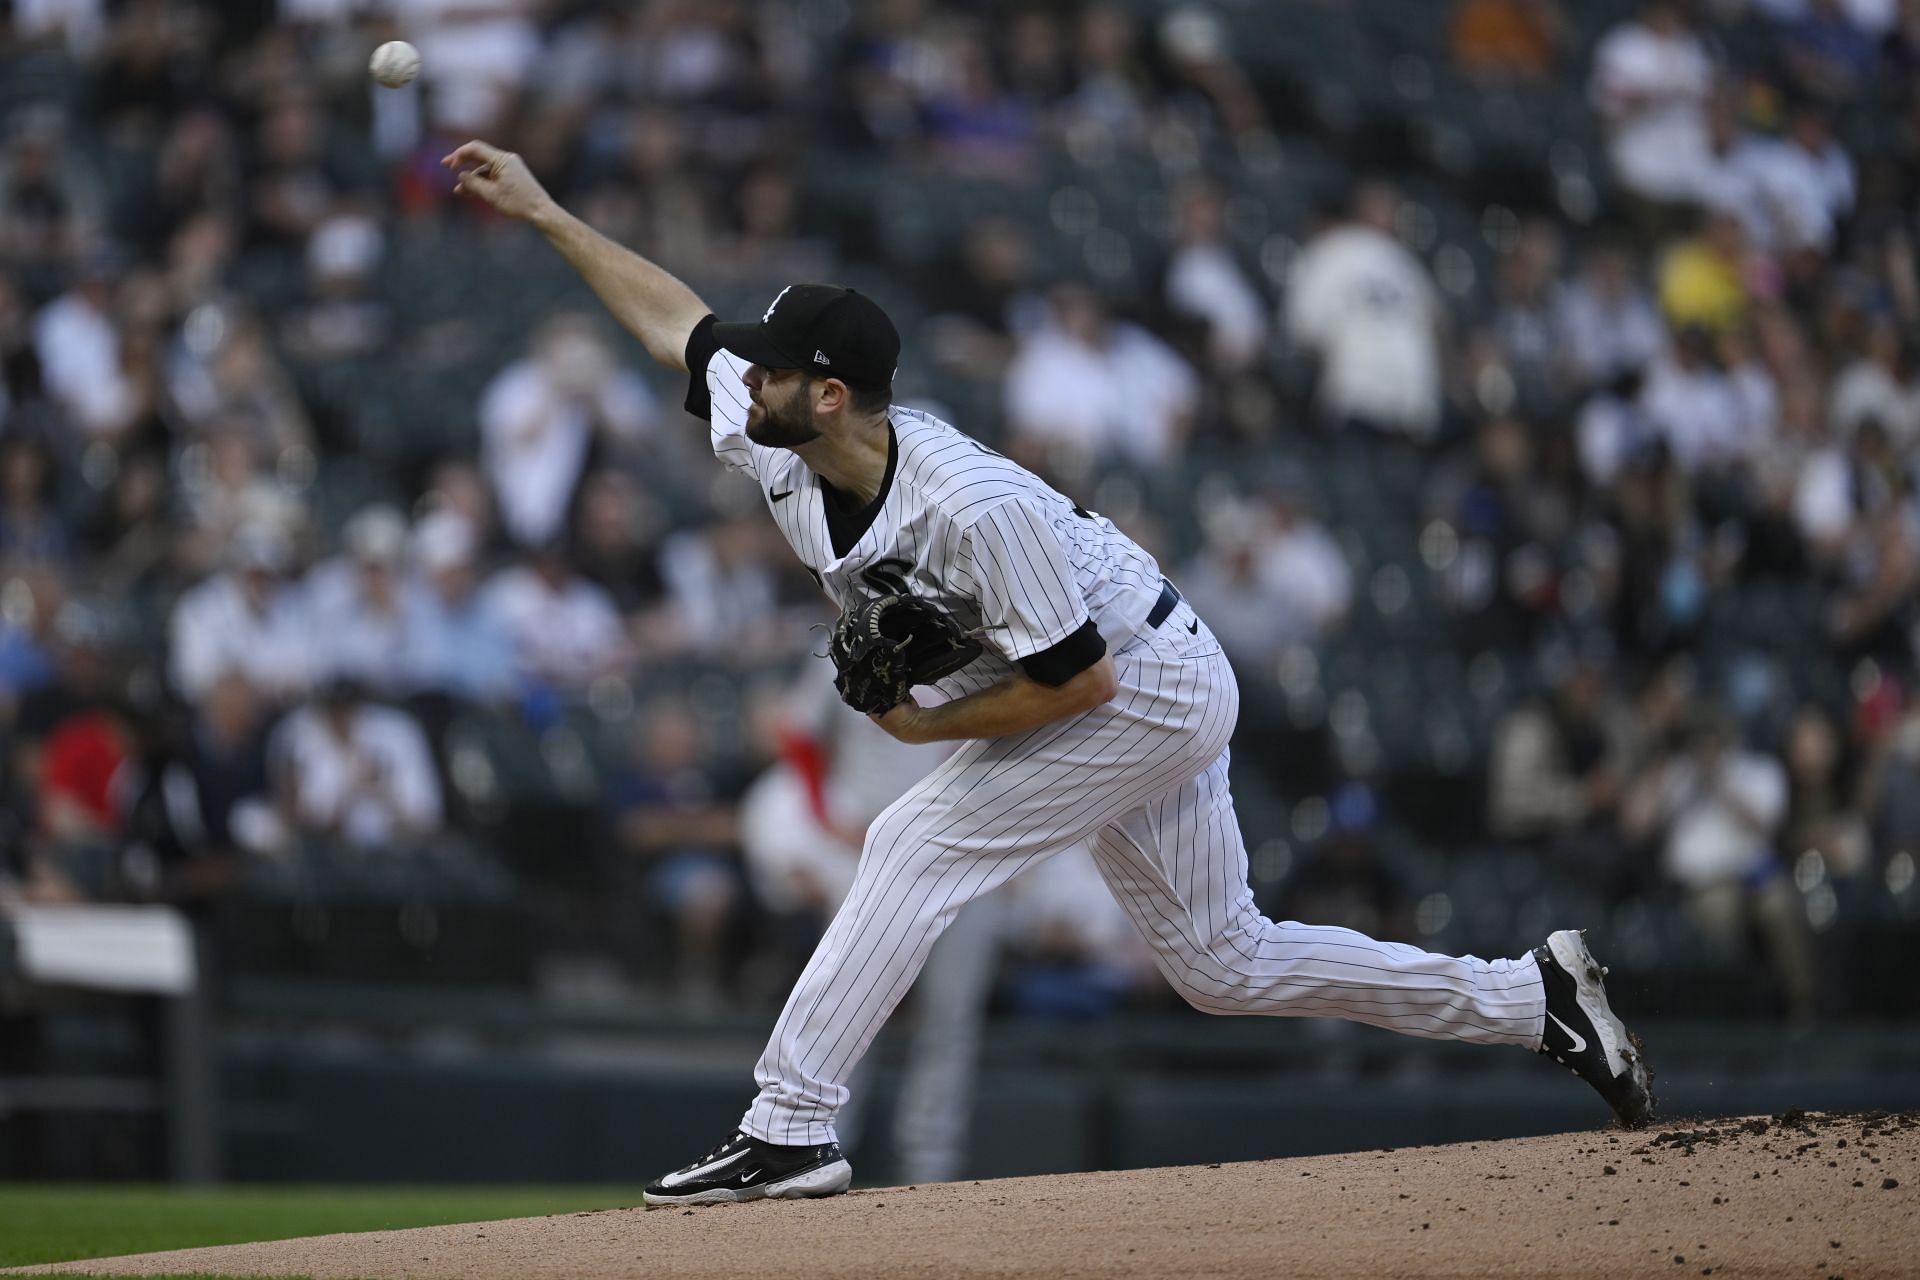 Lucas Giolito working on no-hitter against Yankees through six innings